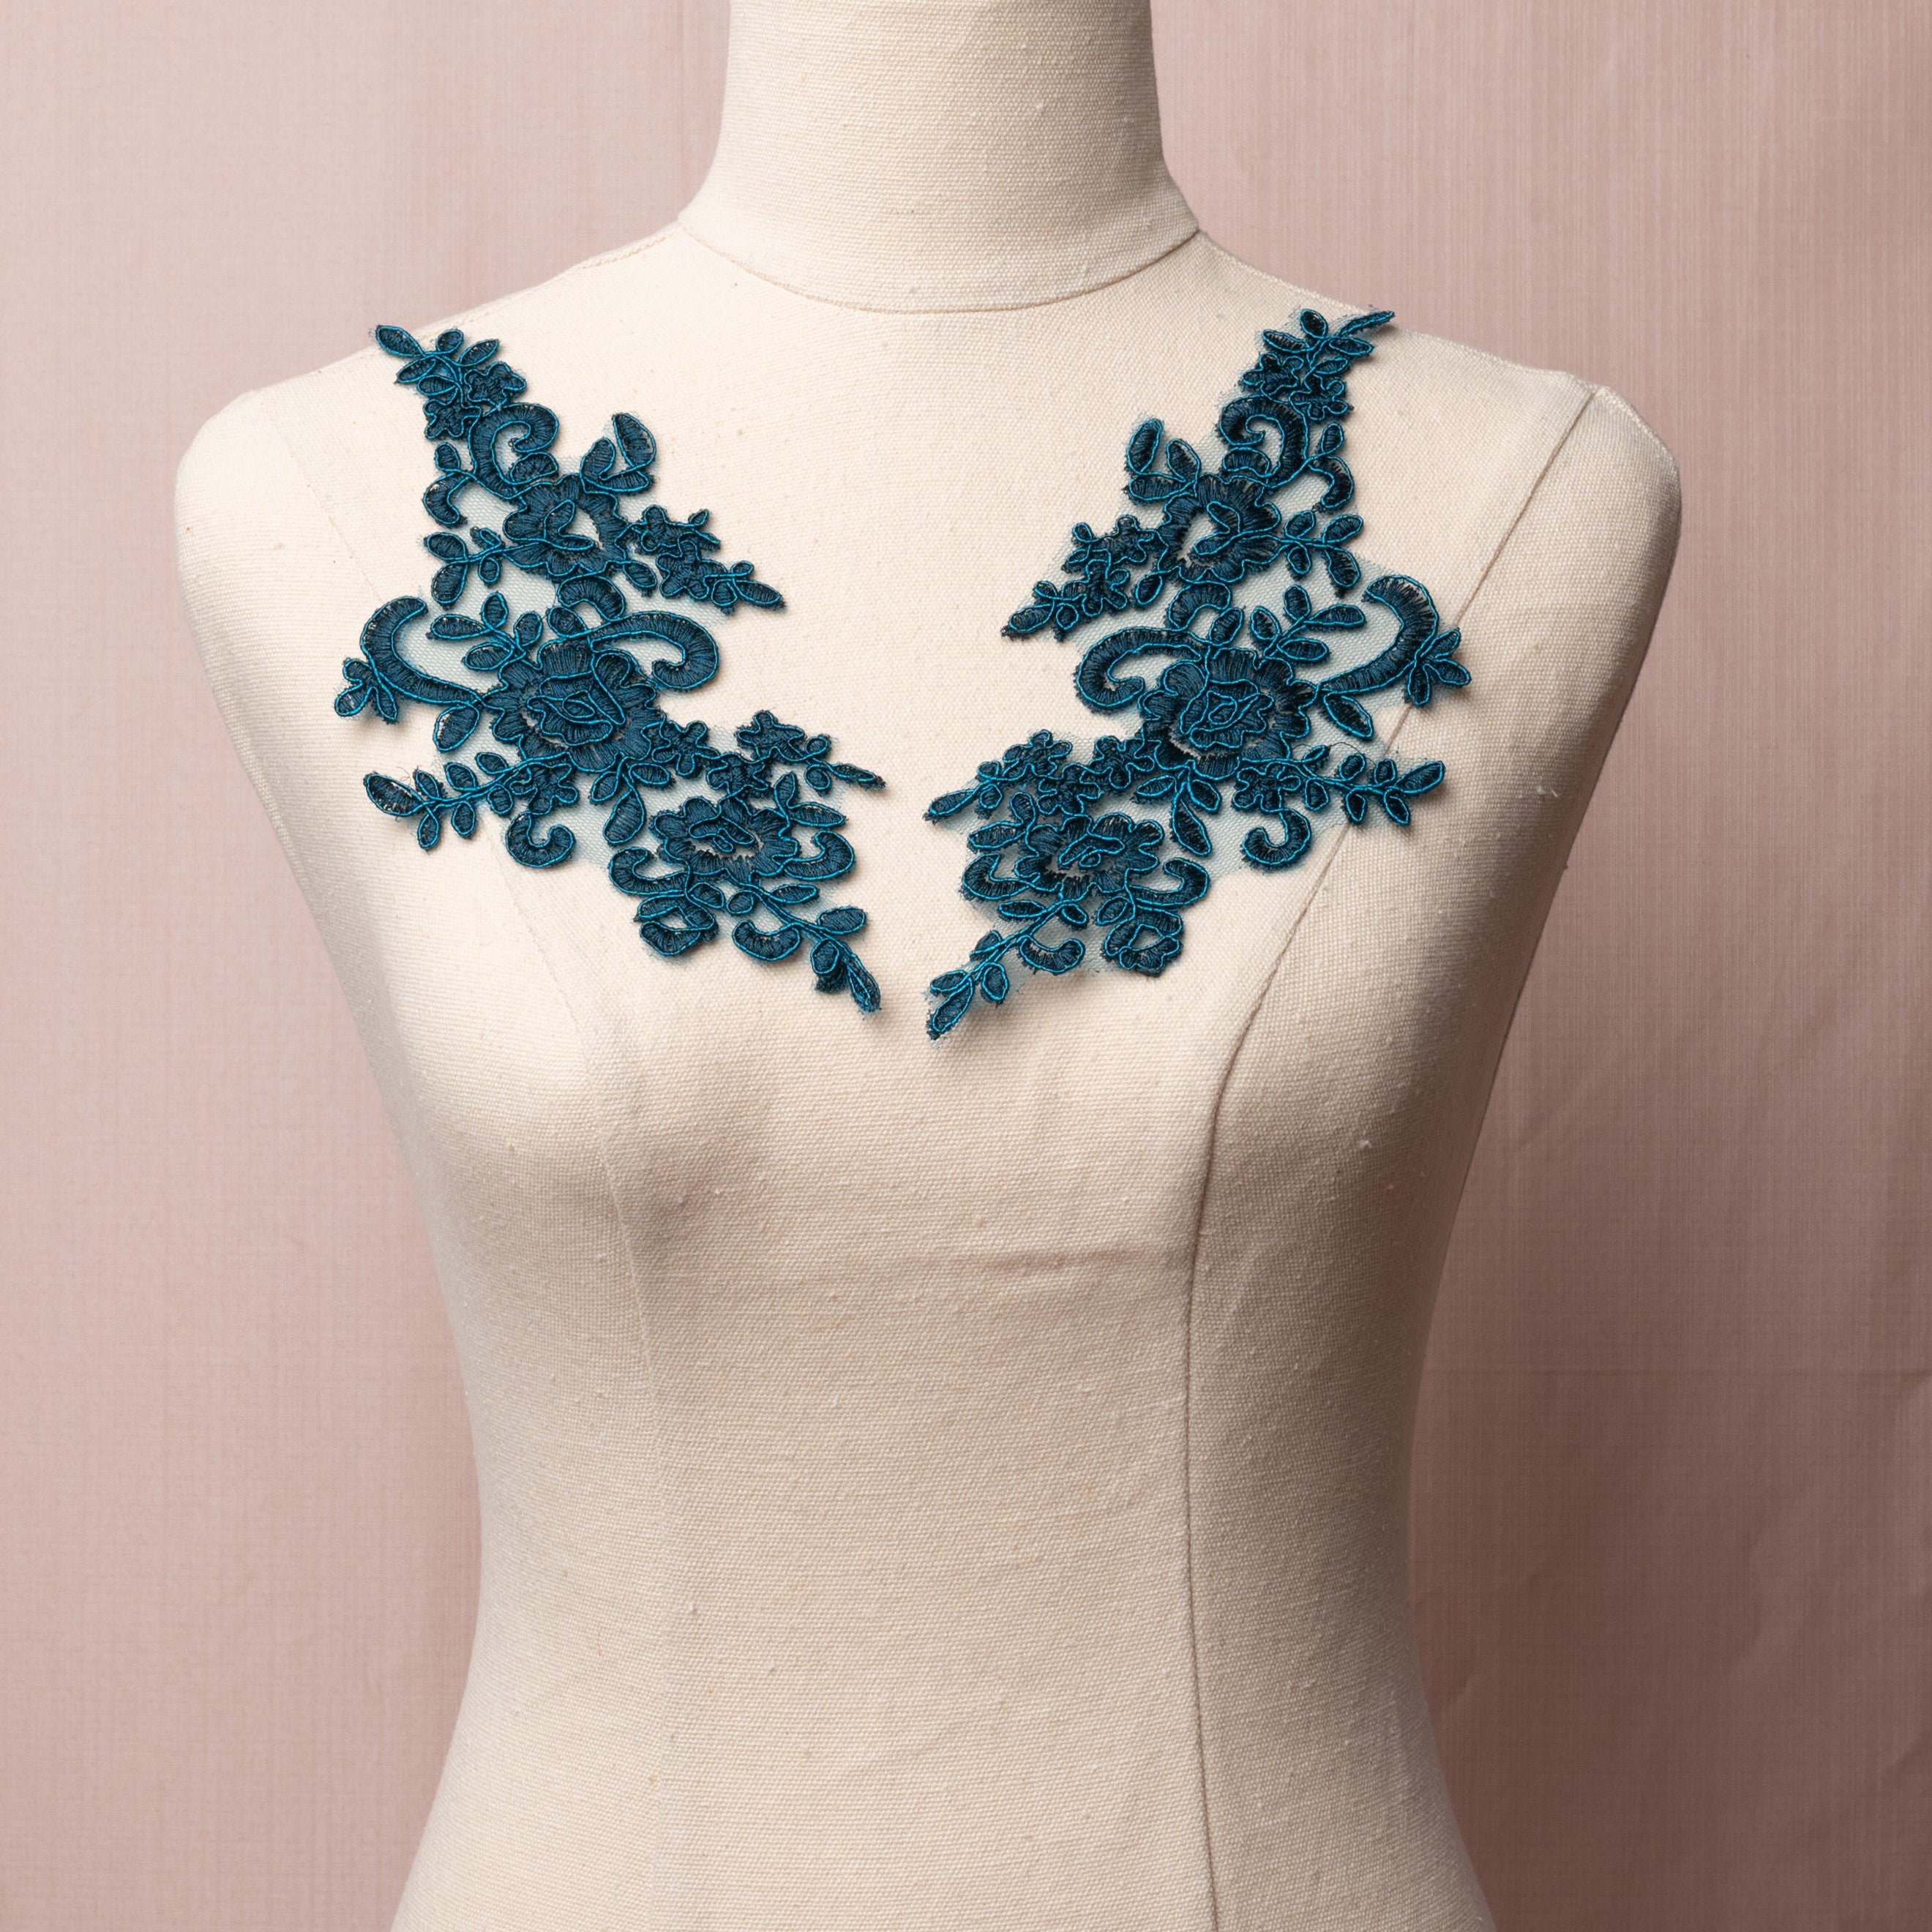 Mirrored pair of  teal peacock blue corded floral appliques embroidered onto a fine net and displayed on a mannequin